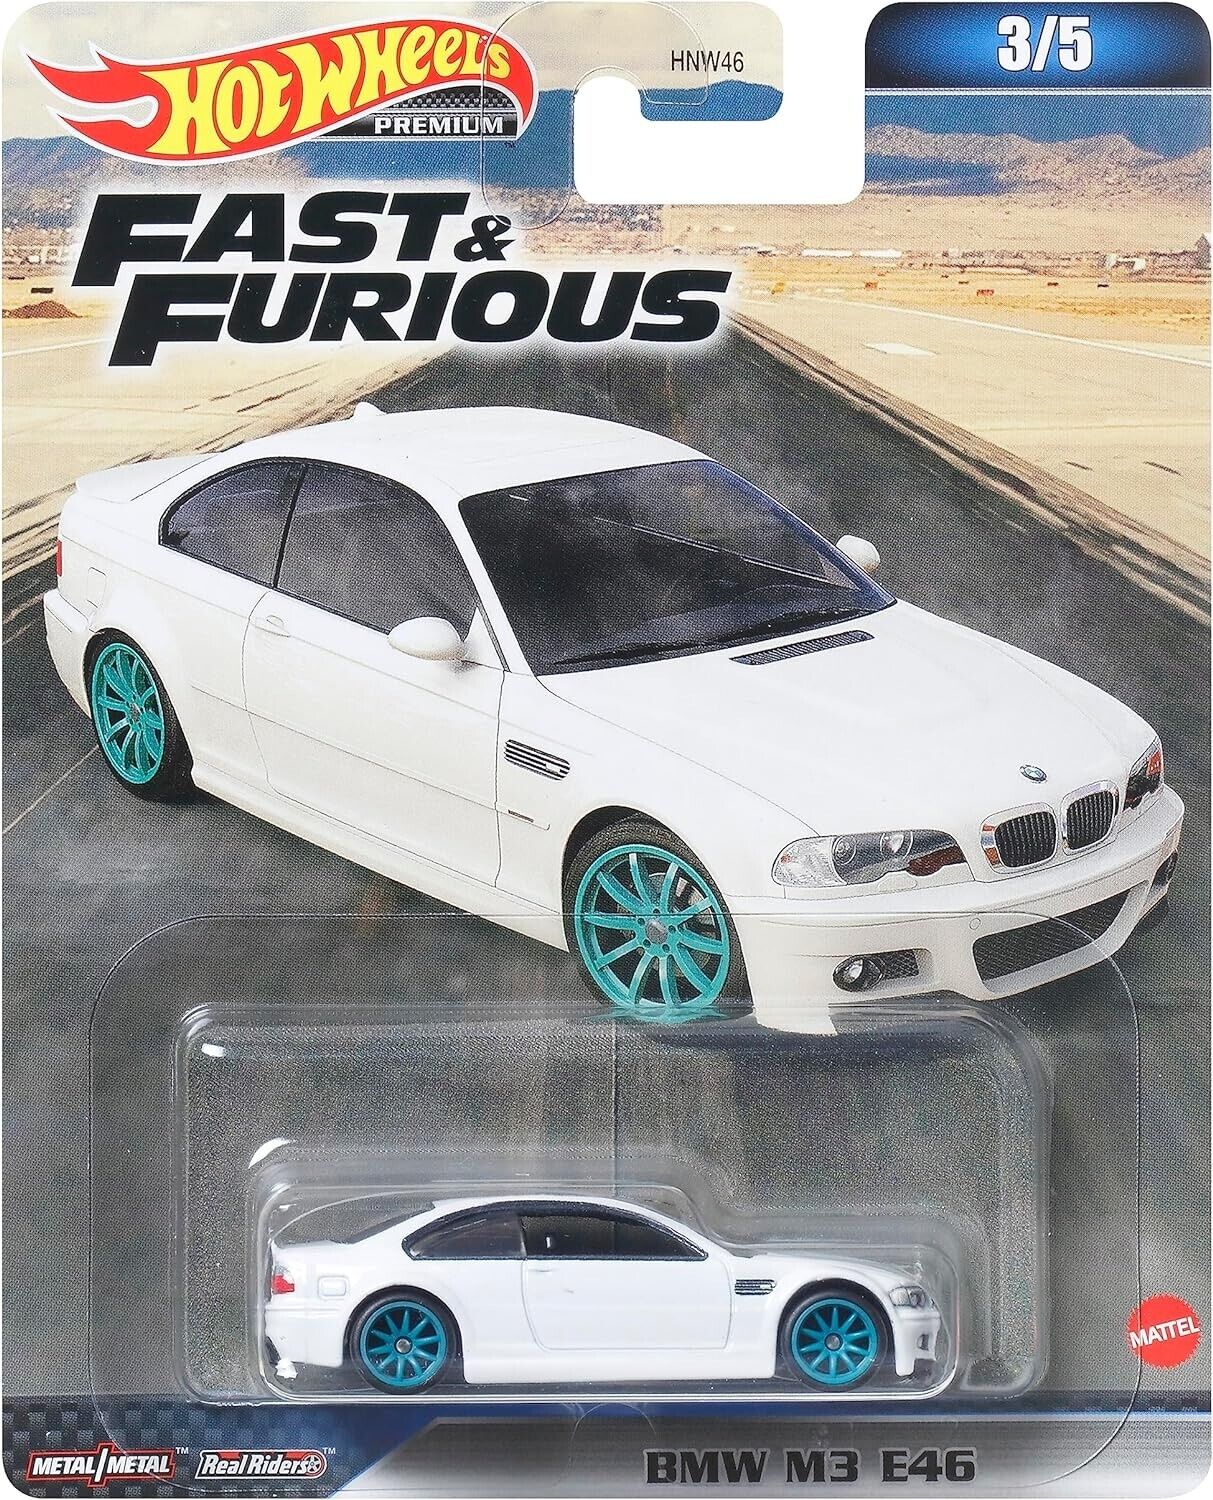 Hot Wheels 2023 Fast and Furious BMW M3 E46 Metal Die-cast Car Model Toy 1/64